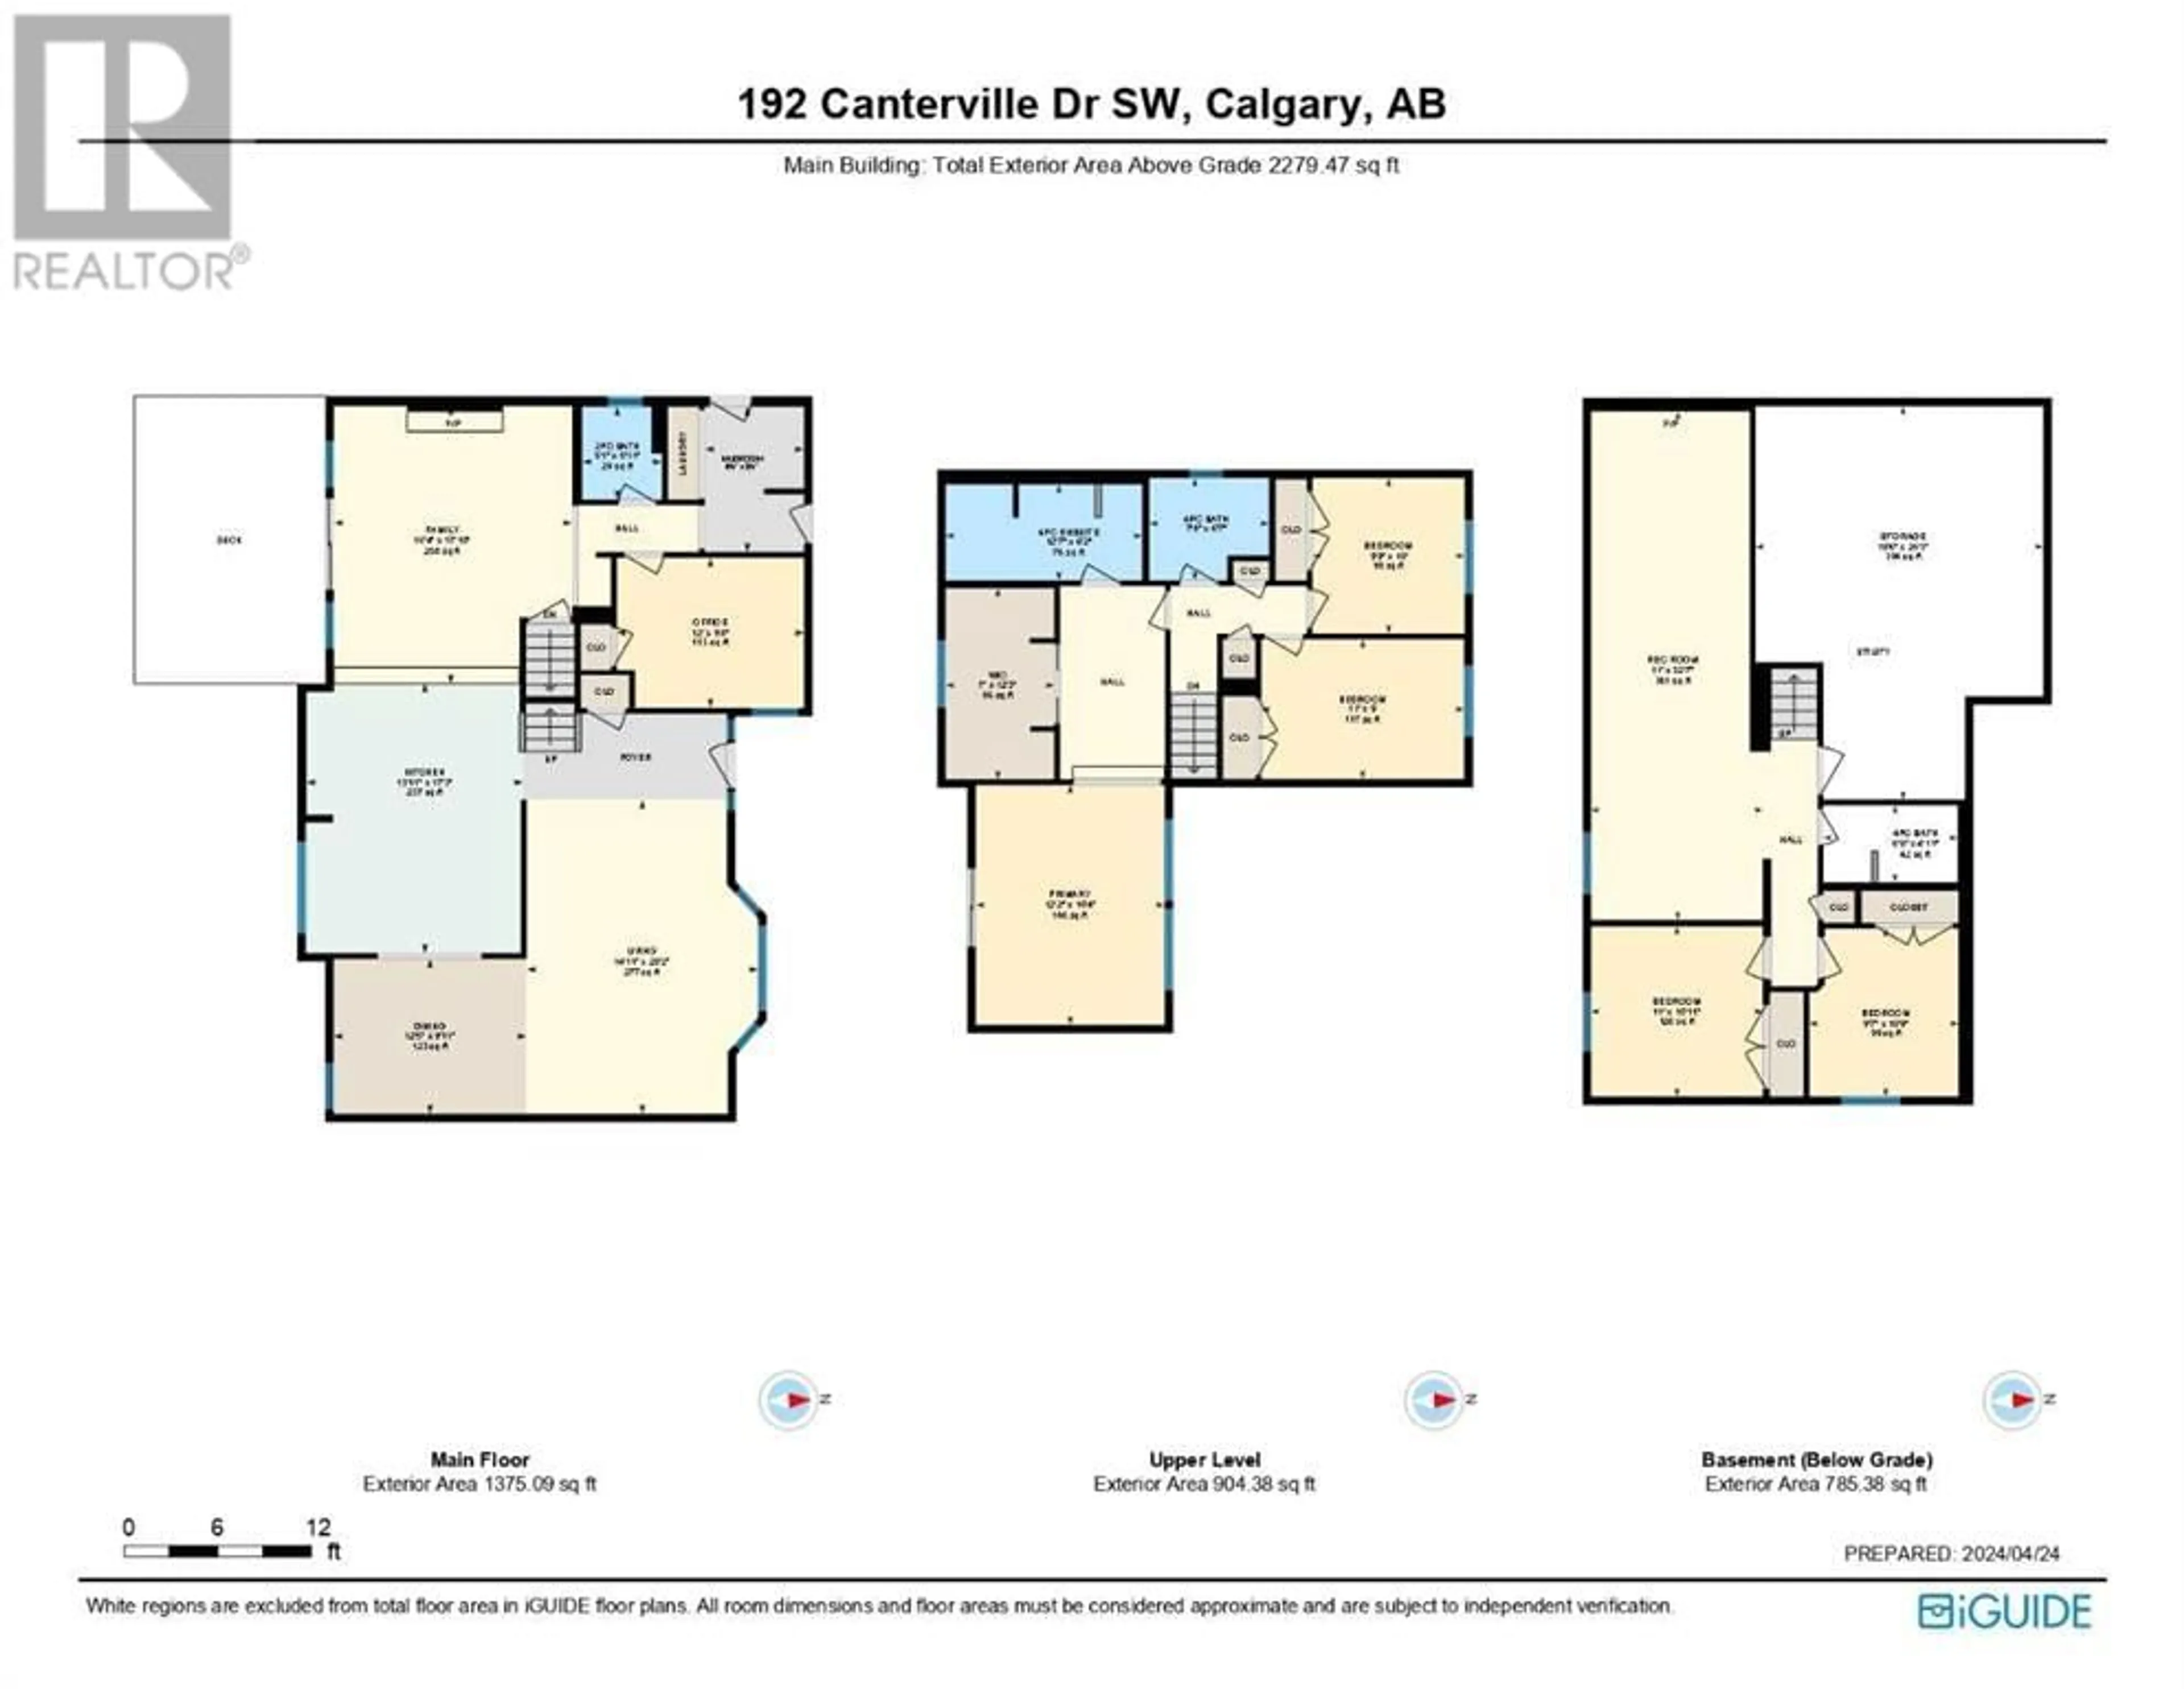 Floor plan for 192 Canterville Drive SW, Calgary Alberta T2W3X2